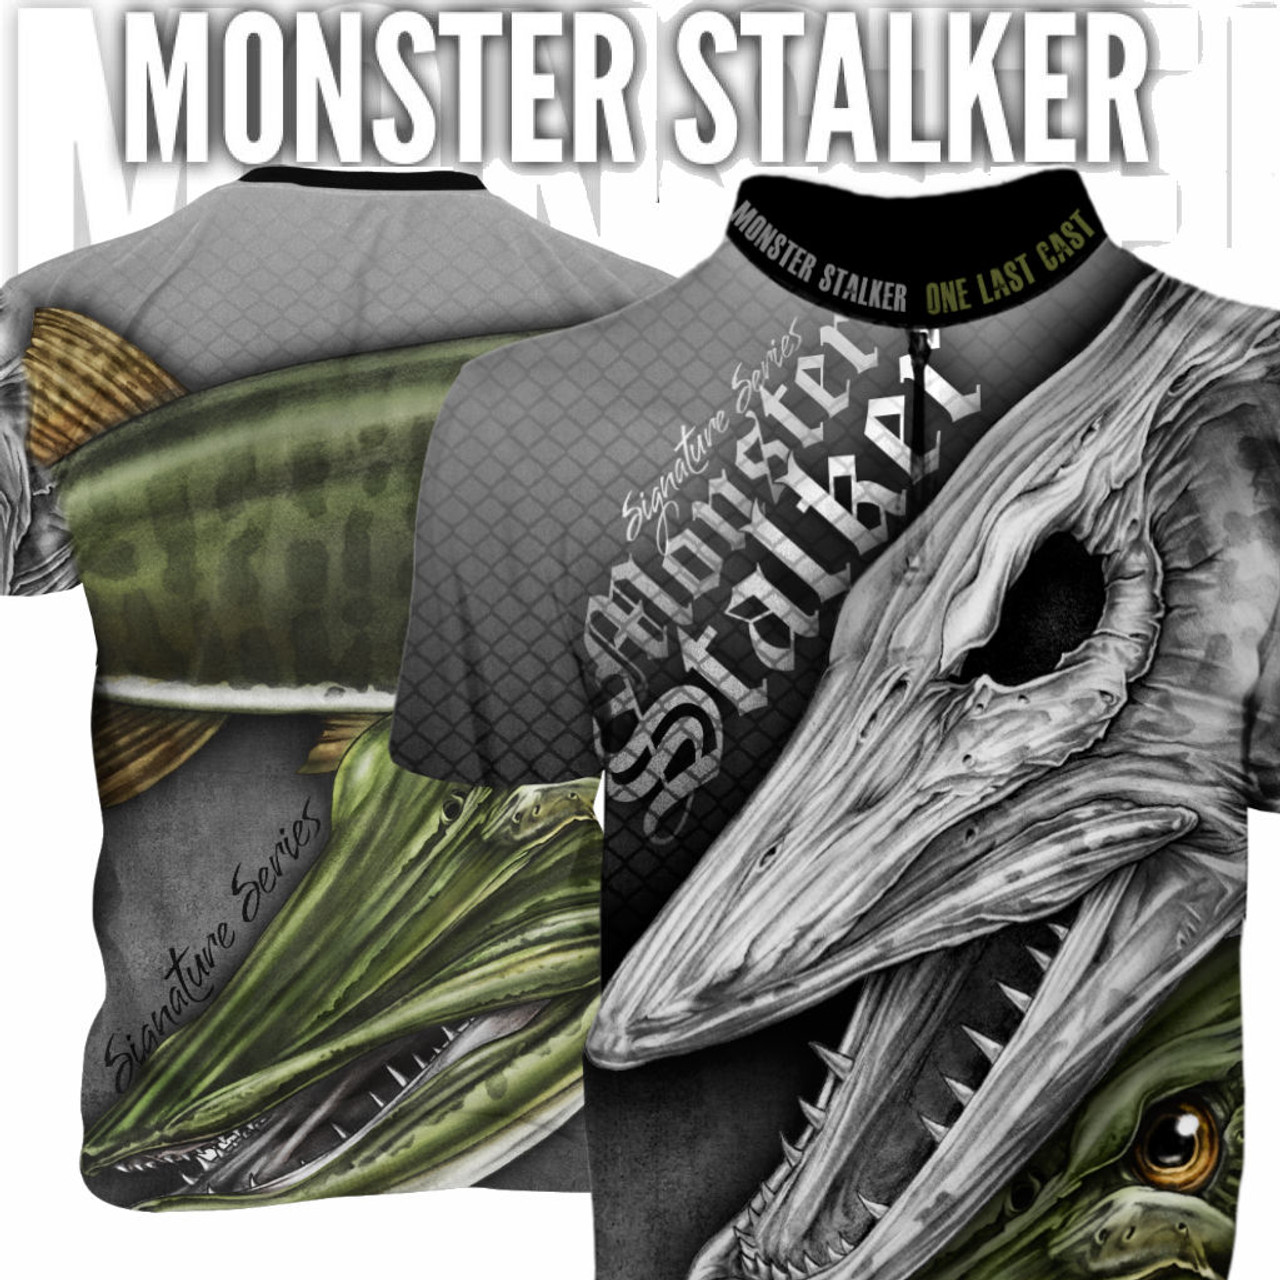 https://cdn11.bigcommerce.com/s-eemvl8dub3/images/stencil/1280x1280/products/148/758/JERSEY_Monster_Stalker_Ghost_Grey_SS_Front_Back_Standard_1024x1024___82364.1561660733.jpg?c=2?imbypass=on